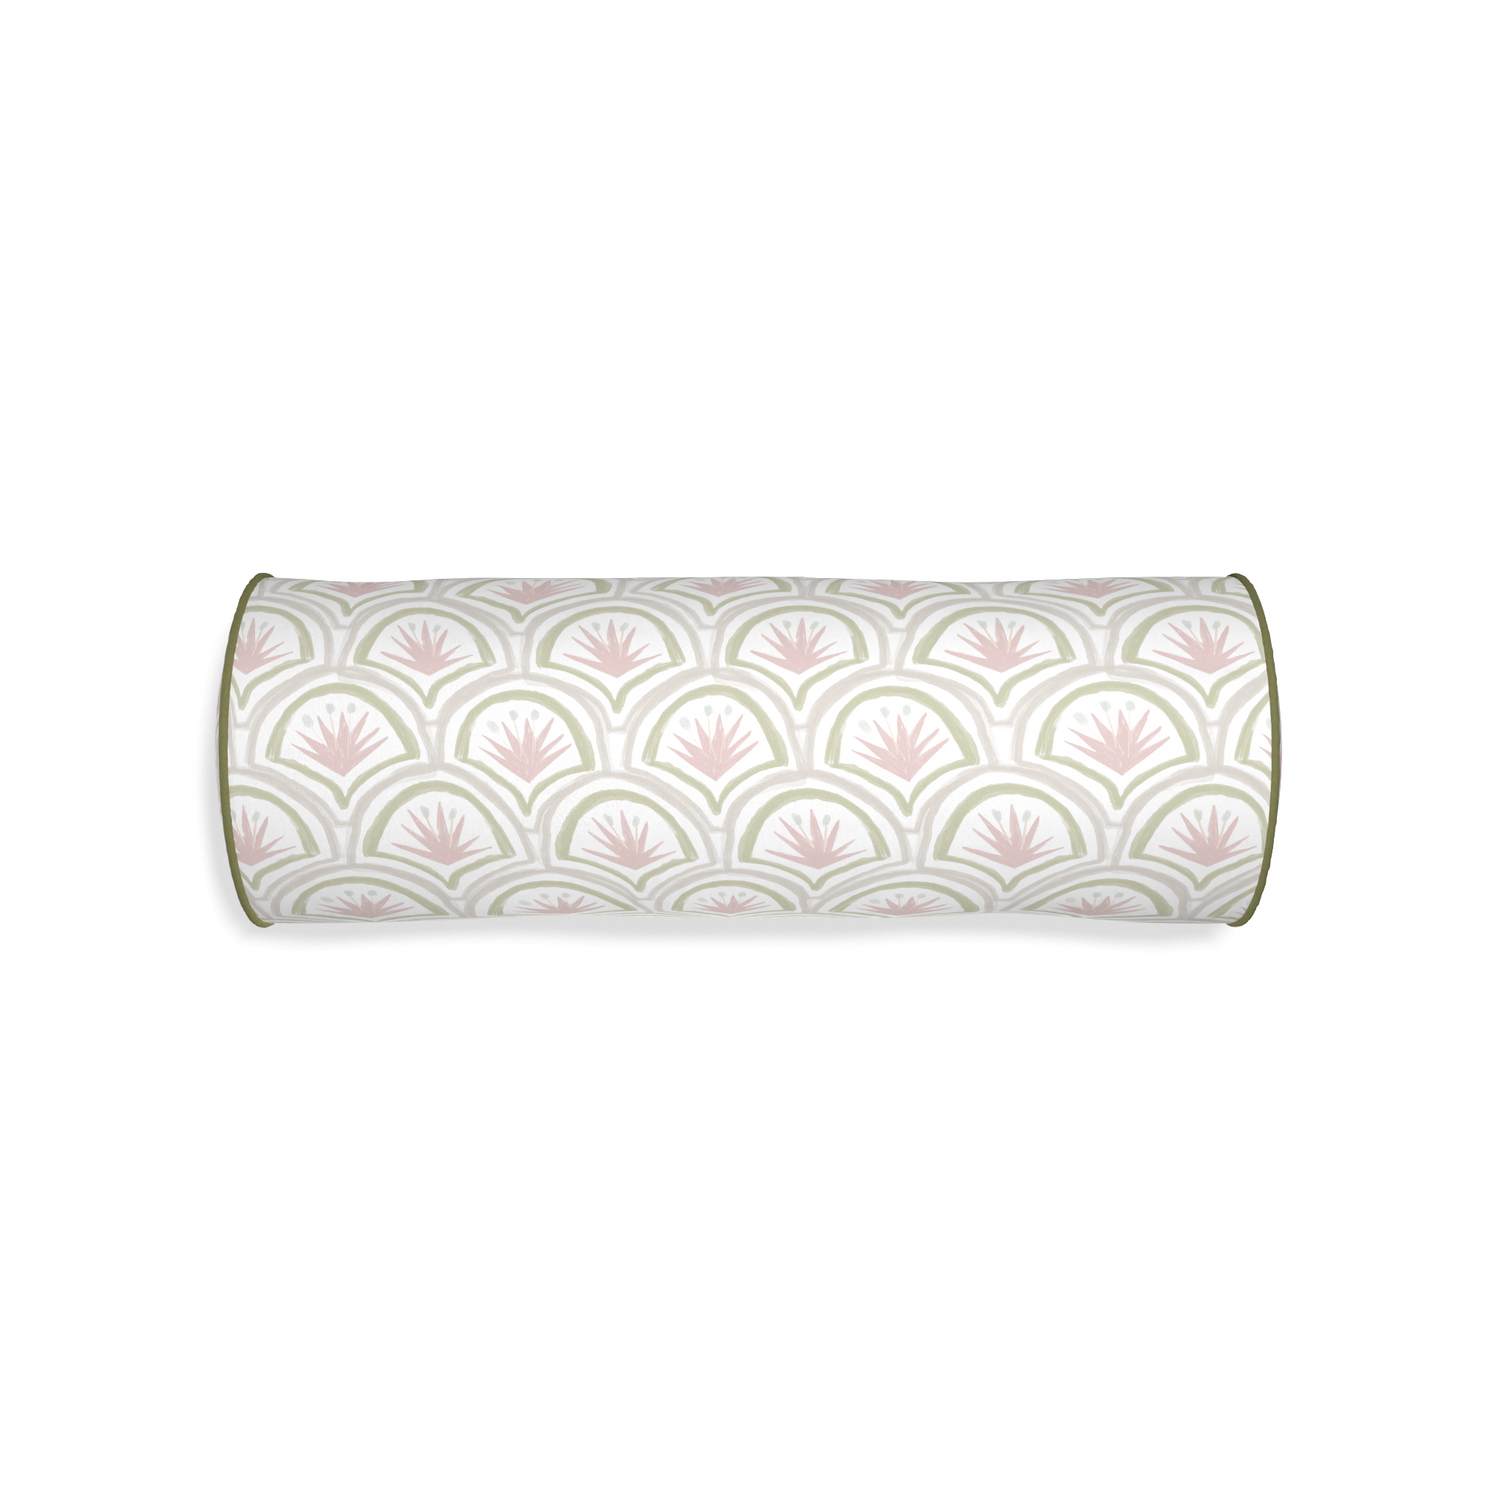 Bolster thatcher rose custom pillow with moss piping on white background